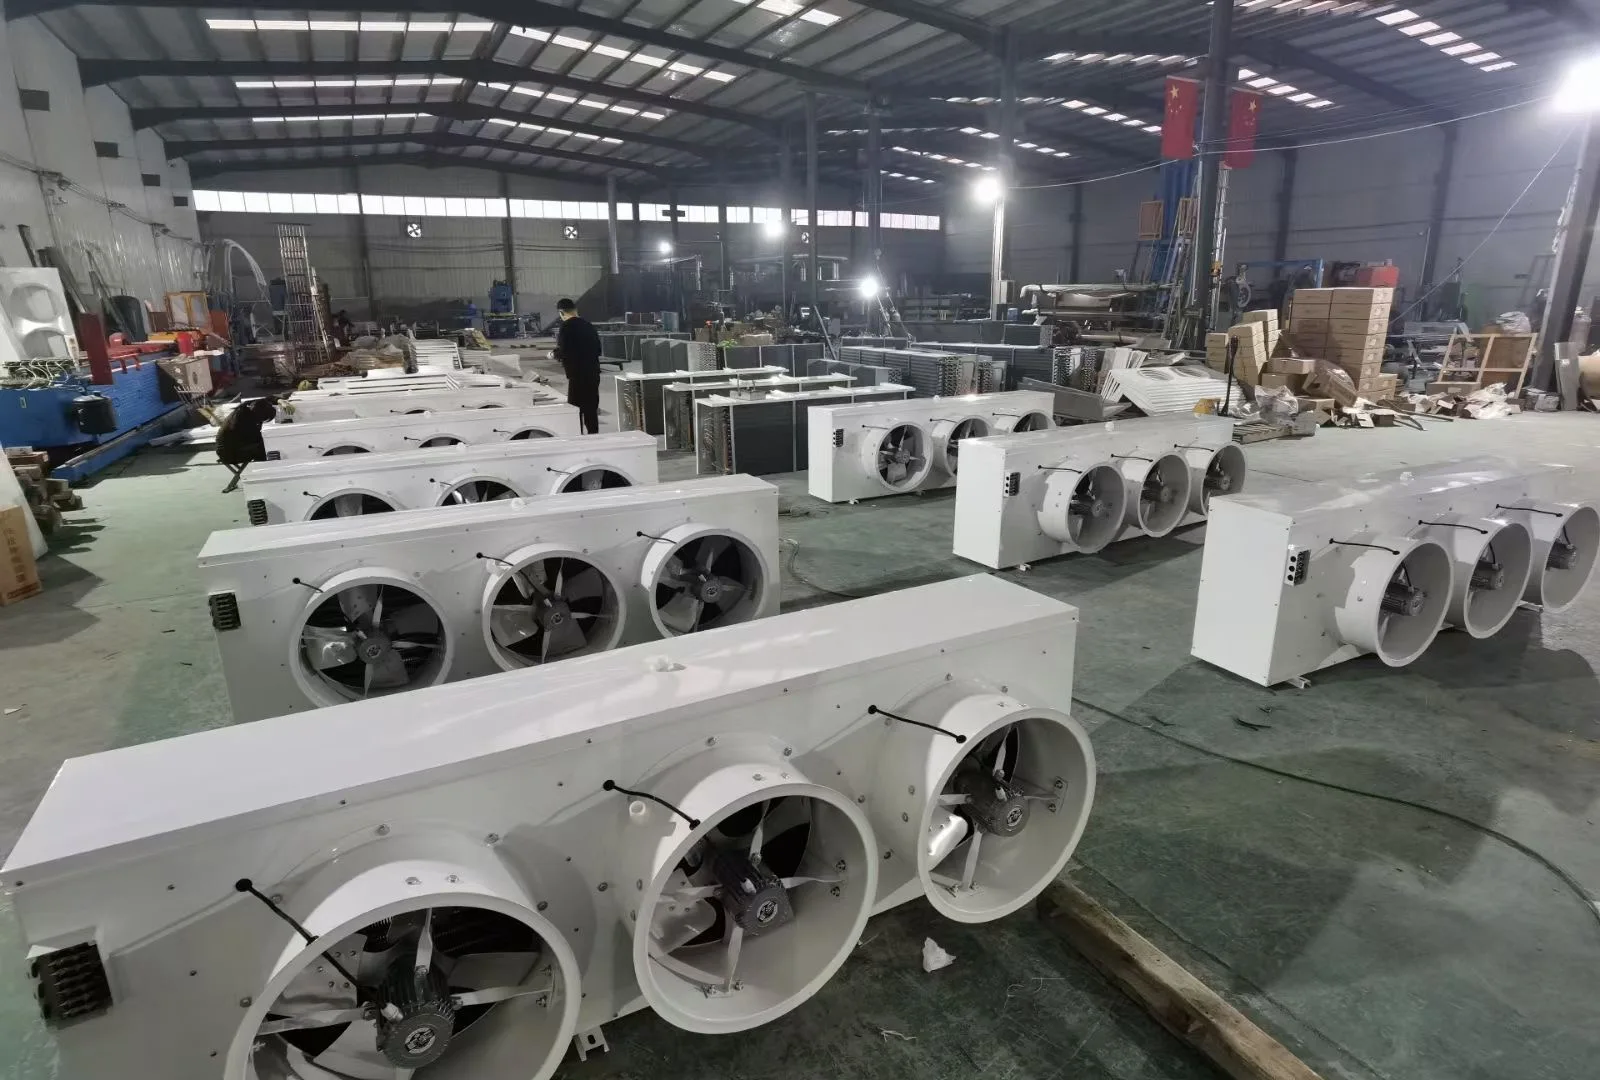 Customized Industrial Cooling System Air Coolers Evaporator Cold Room Cold Storage Evaporated Cooler